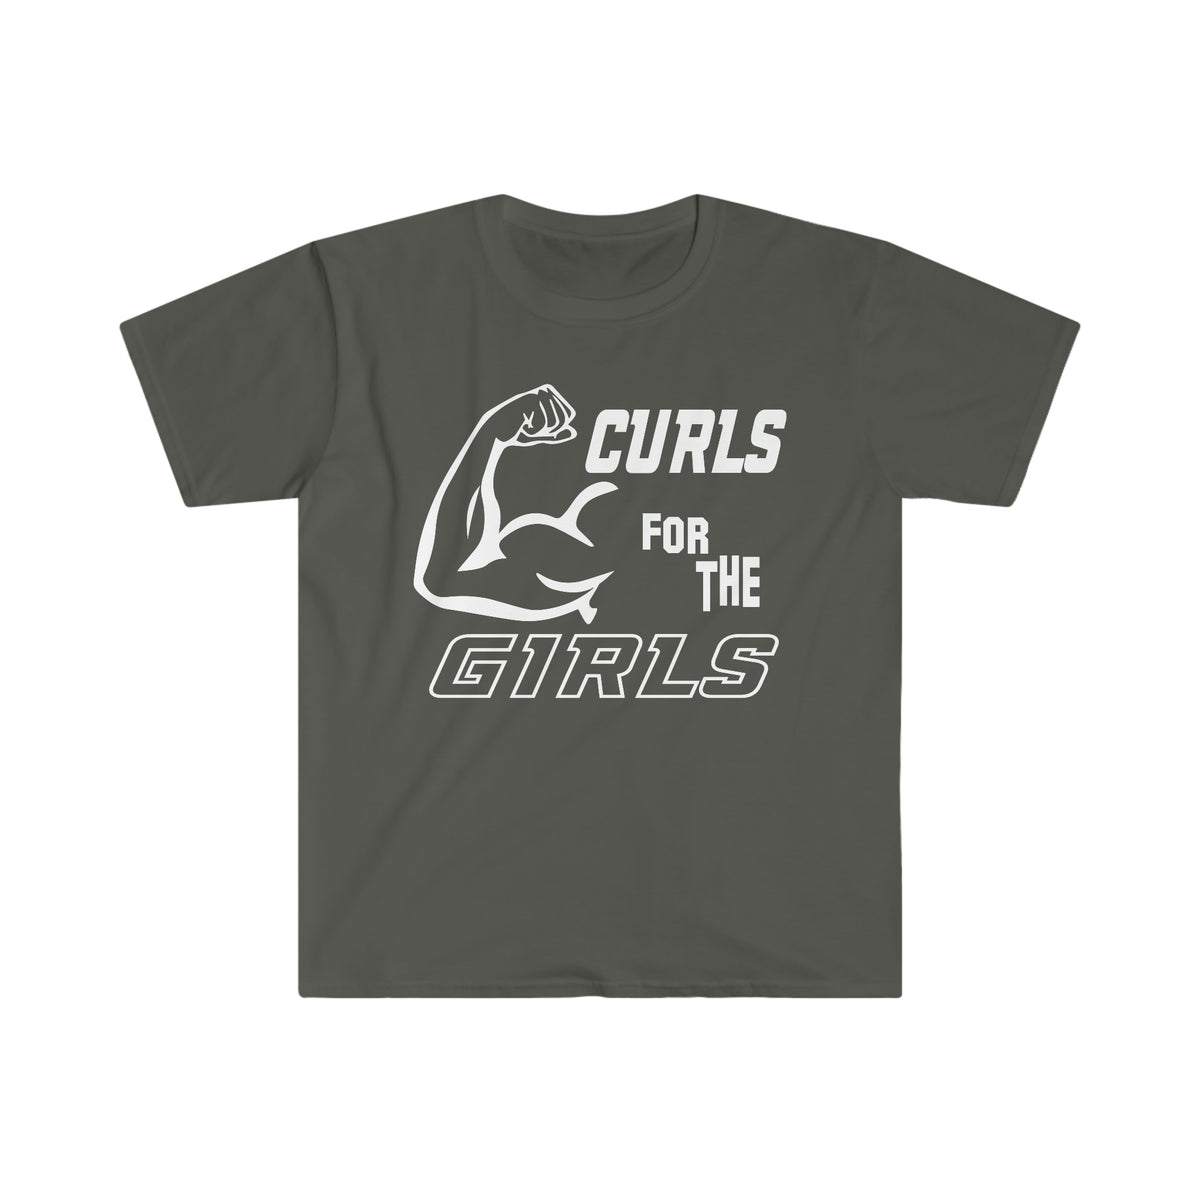 Curls for the Girls T-Shirt